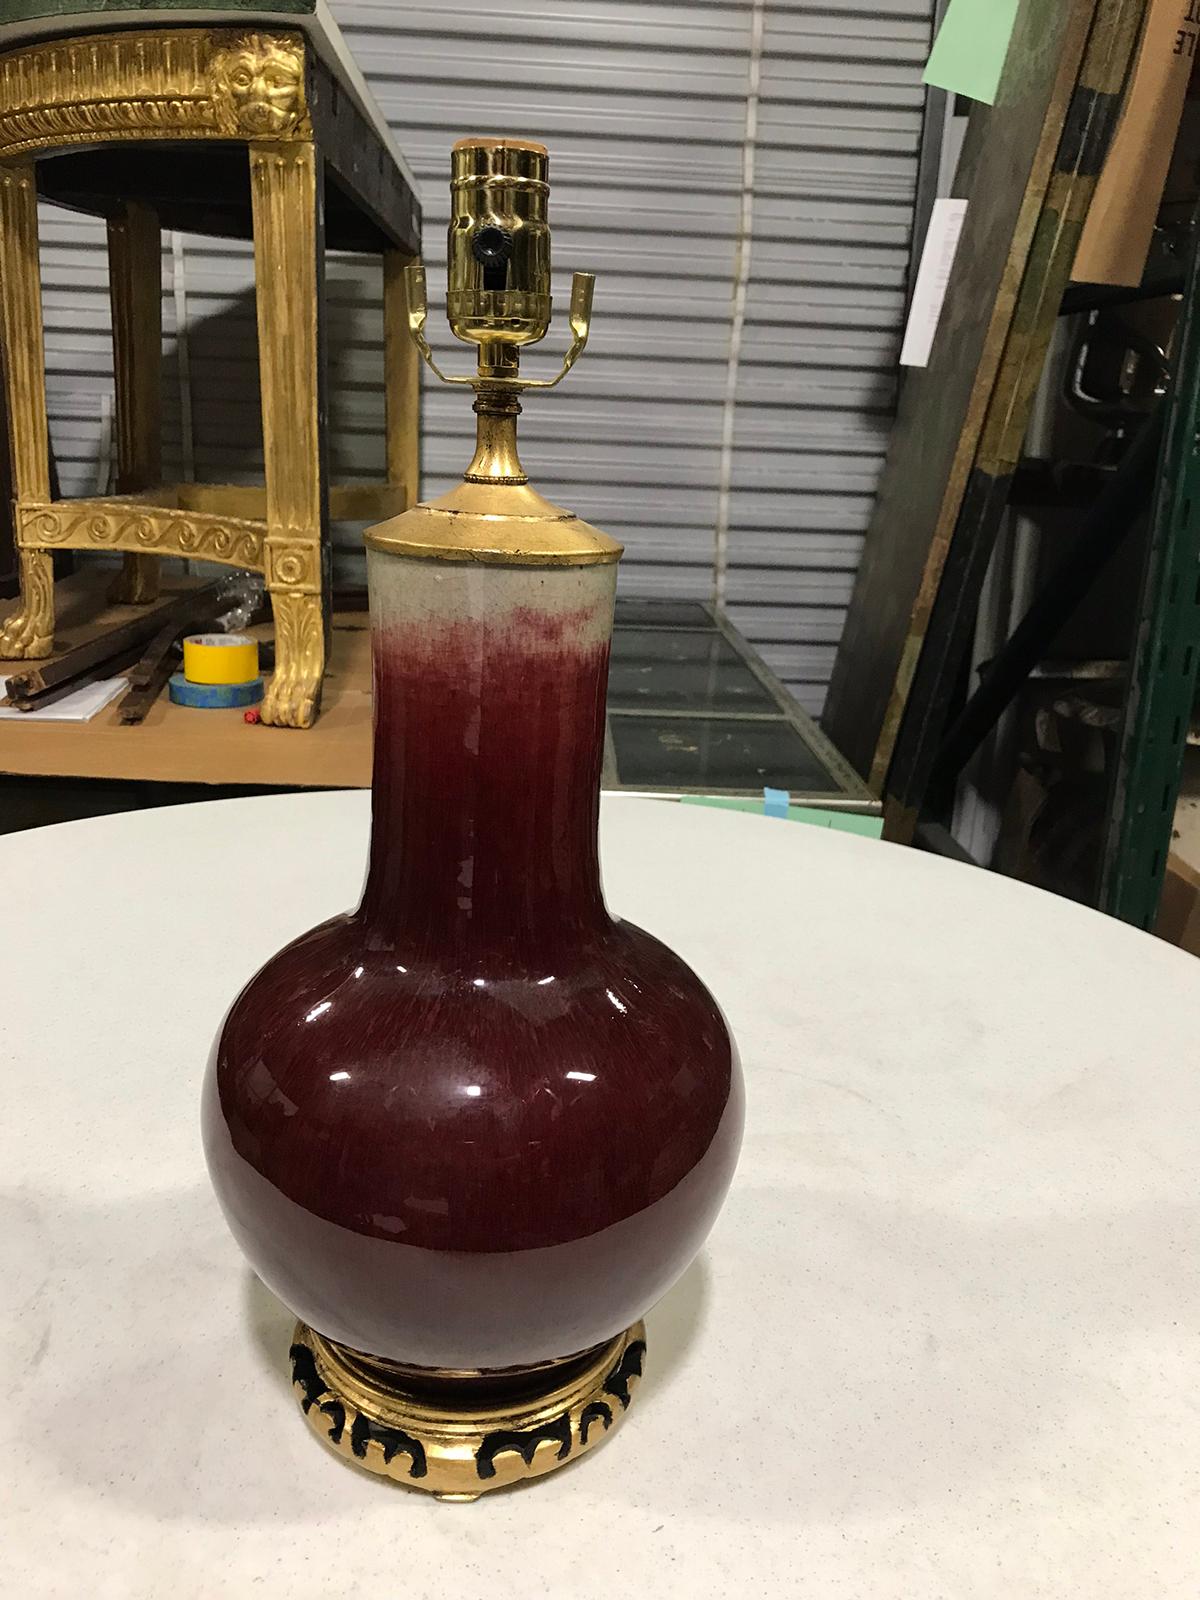 19th-20th century Chinese Sang de Boeuf oxblood porcelain vase as lamp
Giltwood base
New wiring.